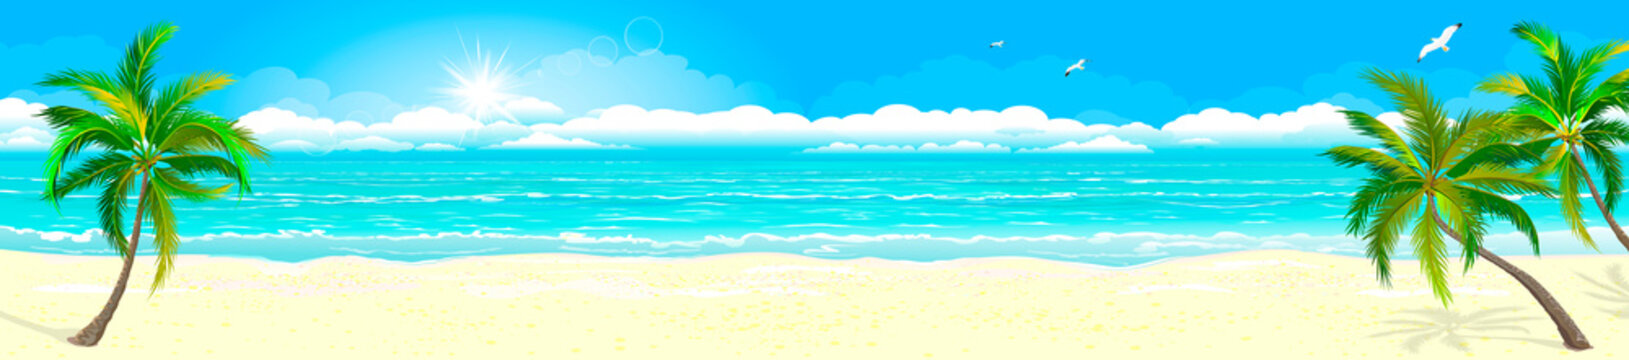 Tropical sandy beach and ocean 1. Panorama of a tropical sandy beach. Ocean coast. Landscape of the tropical coast. Sea shore landscape. Ocean, sky, sun and sand